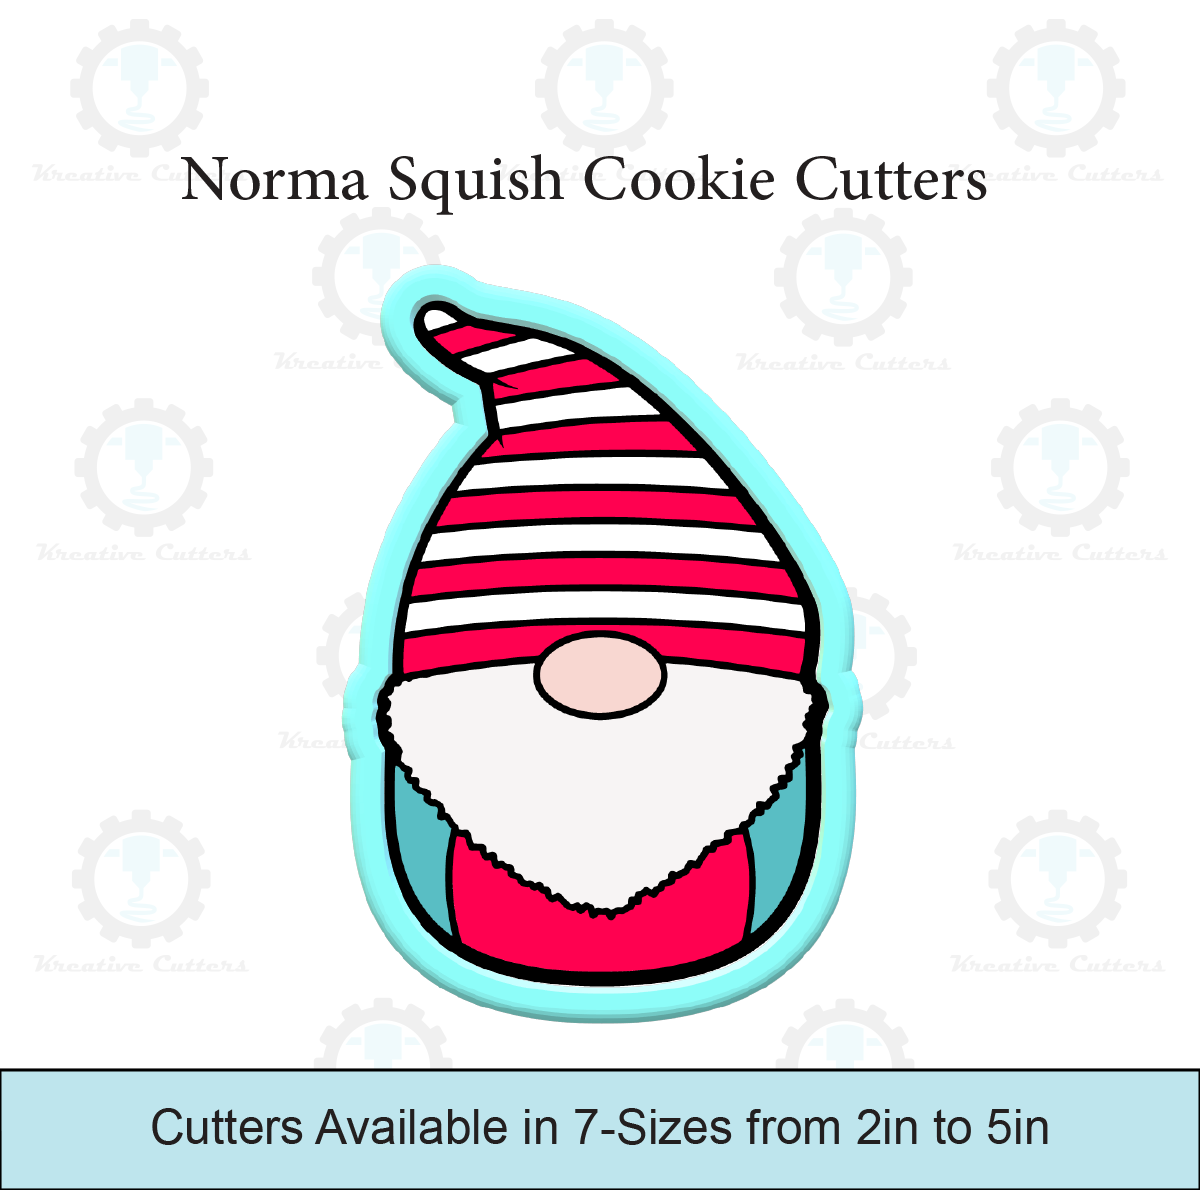 Norma Squish Cookie Cutters